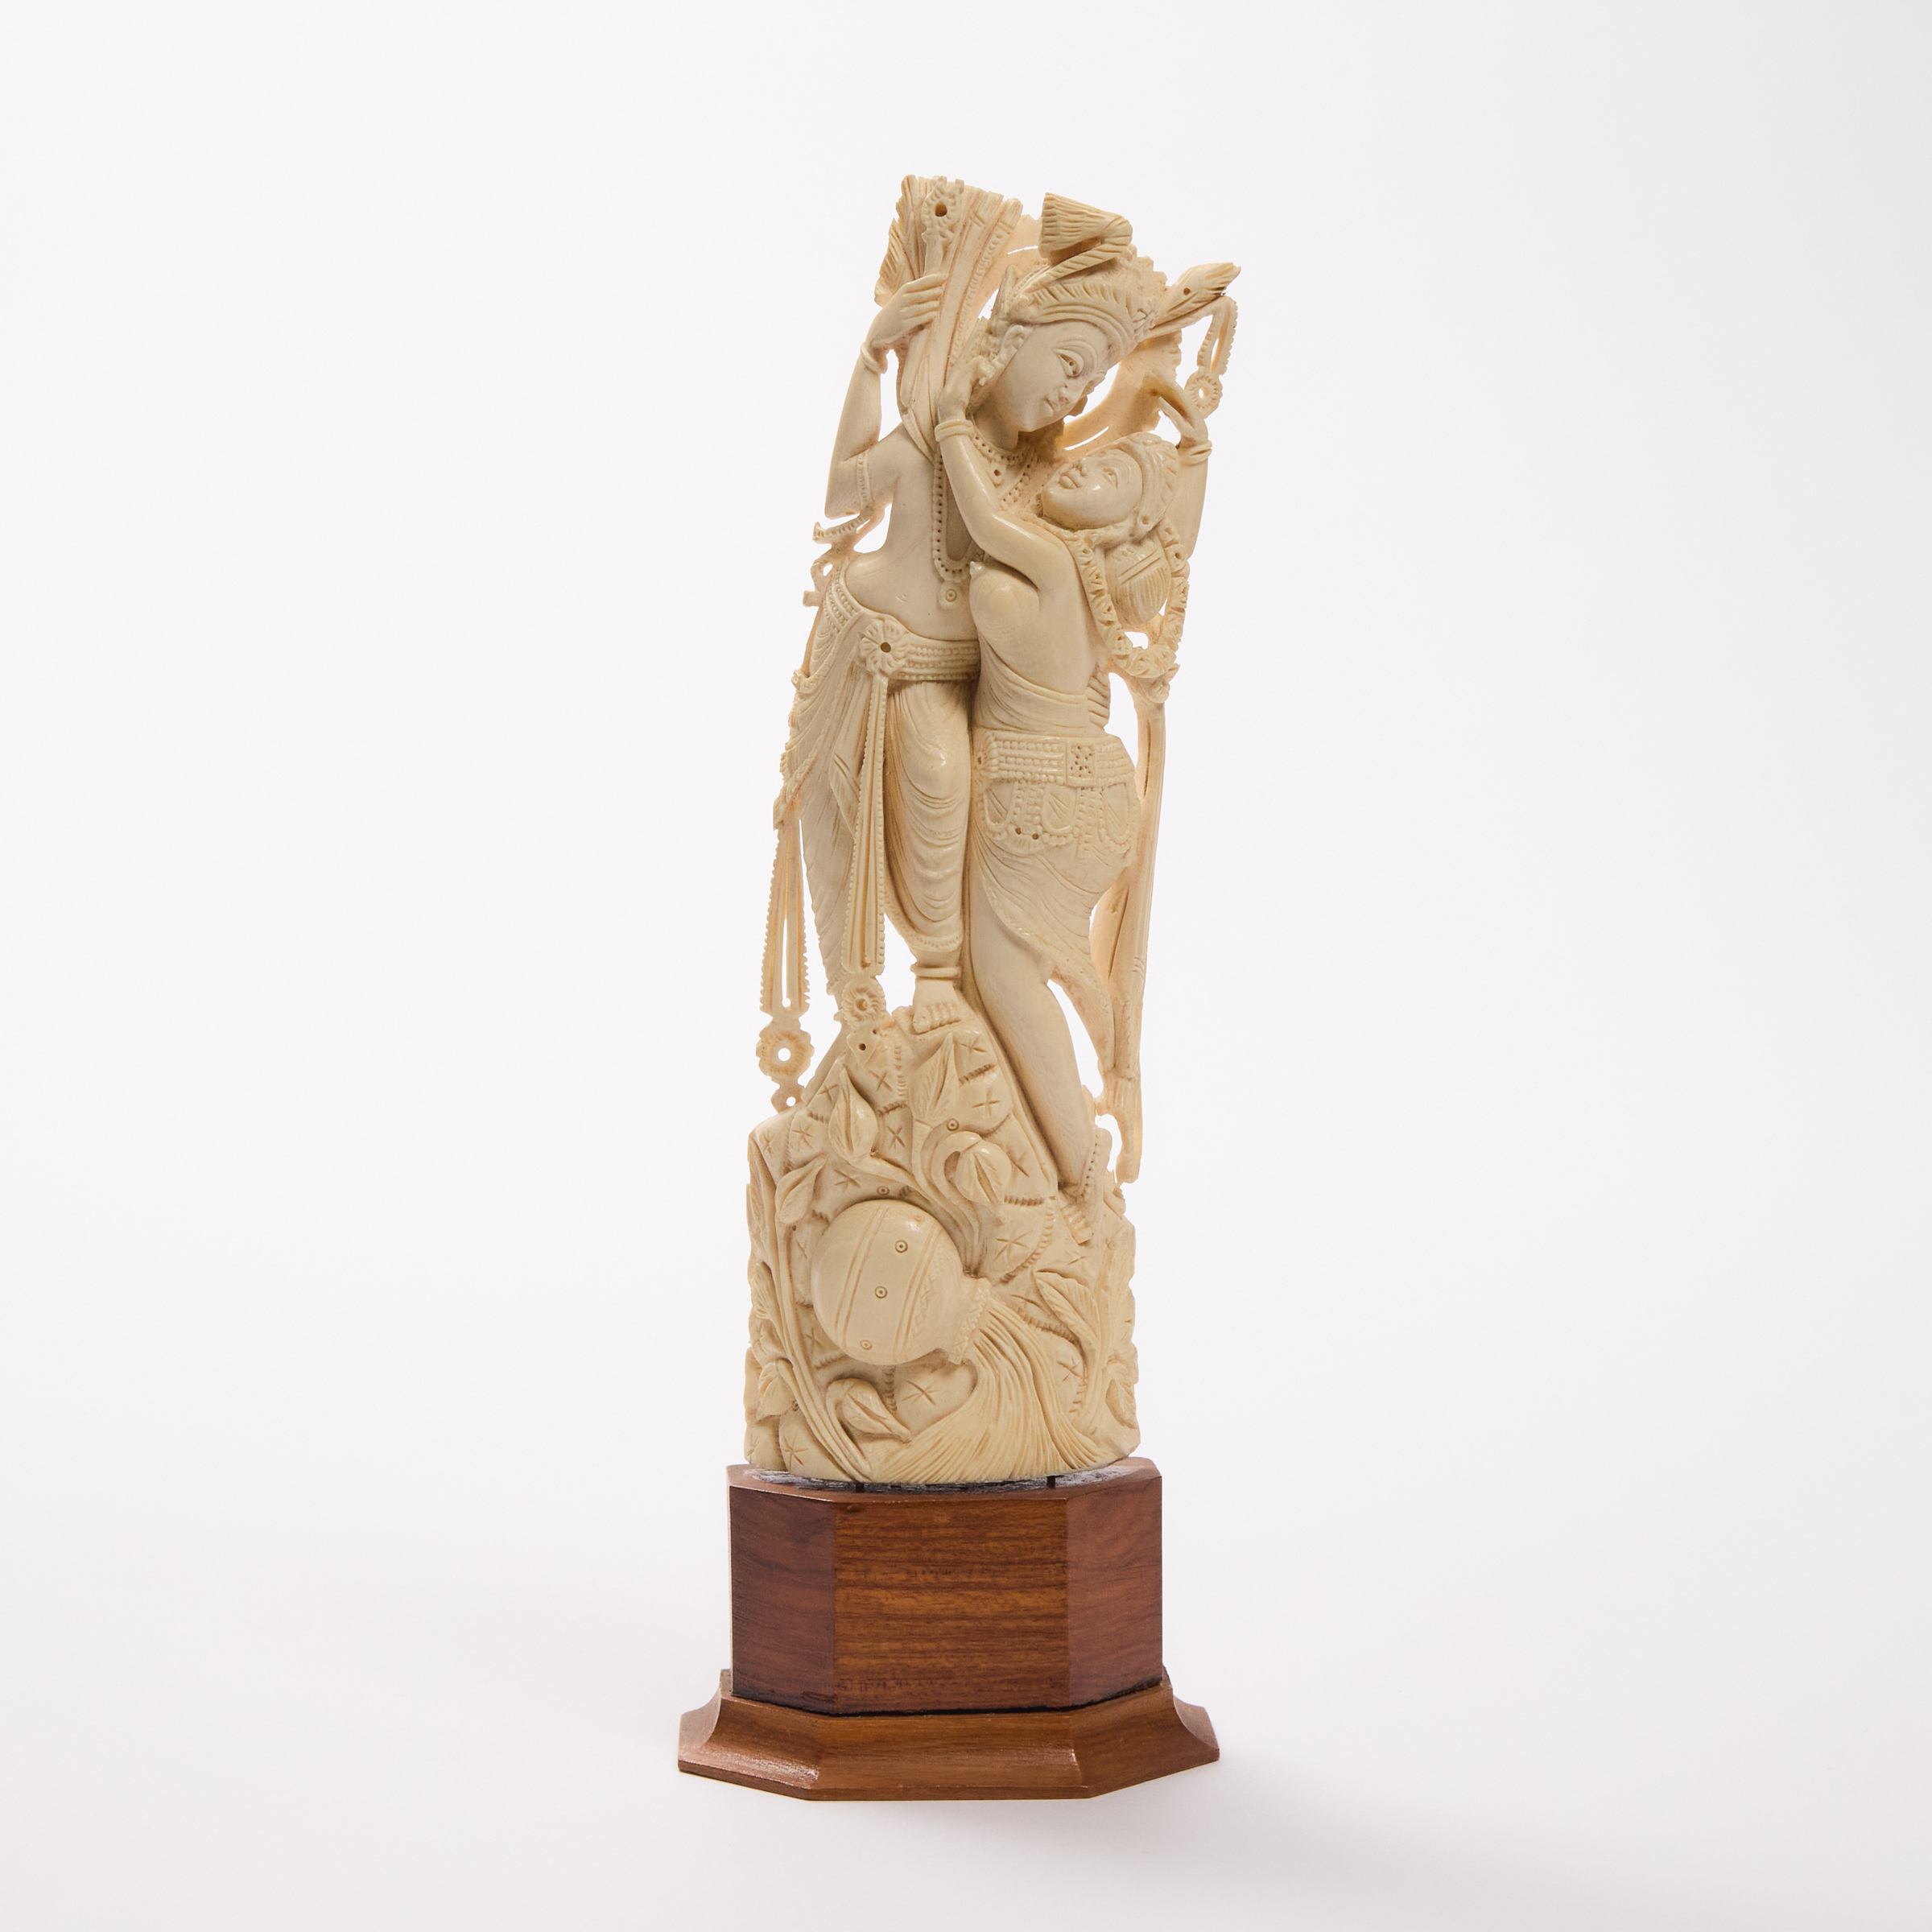 An Indian Ivory Carving of Krishna